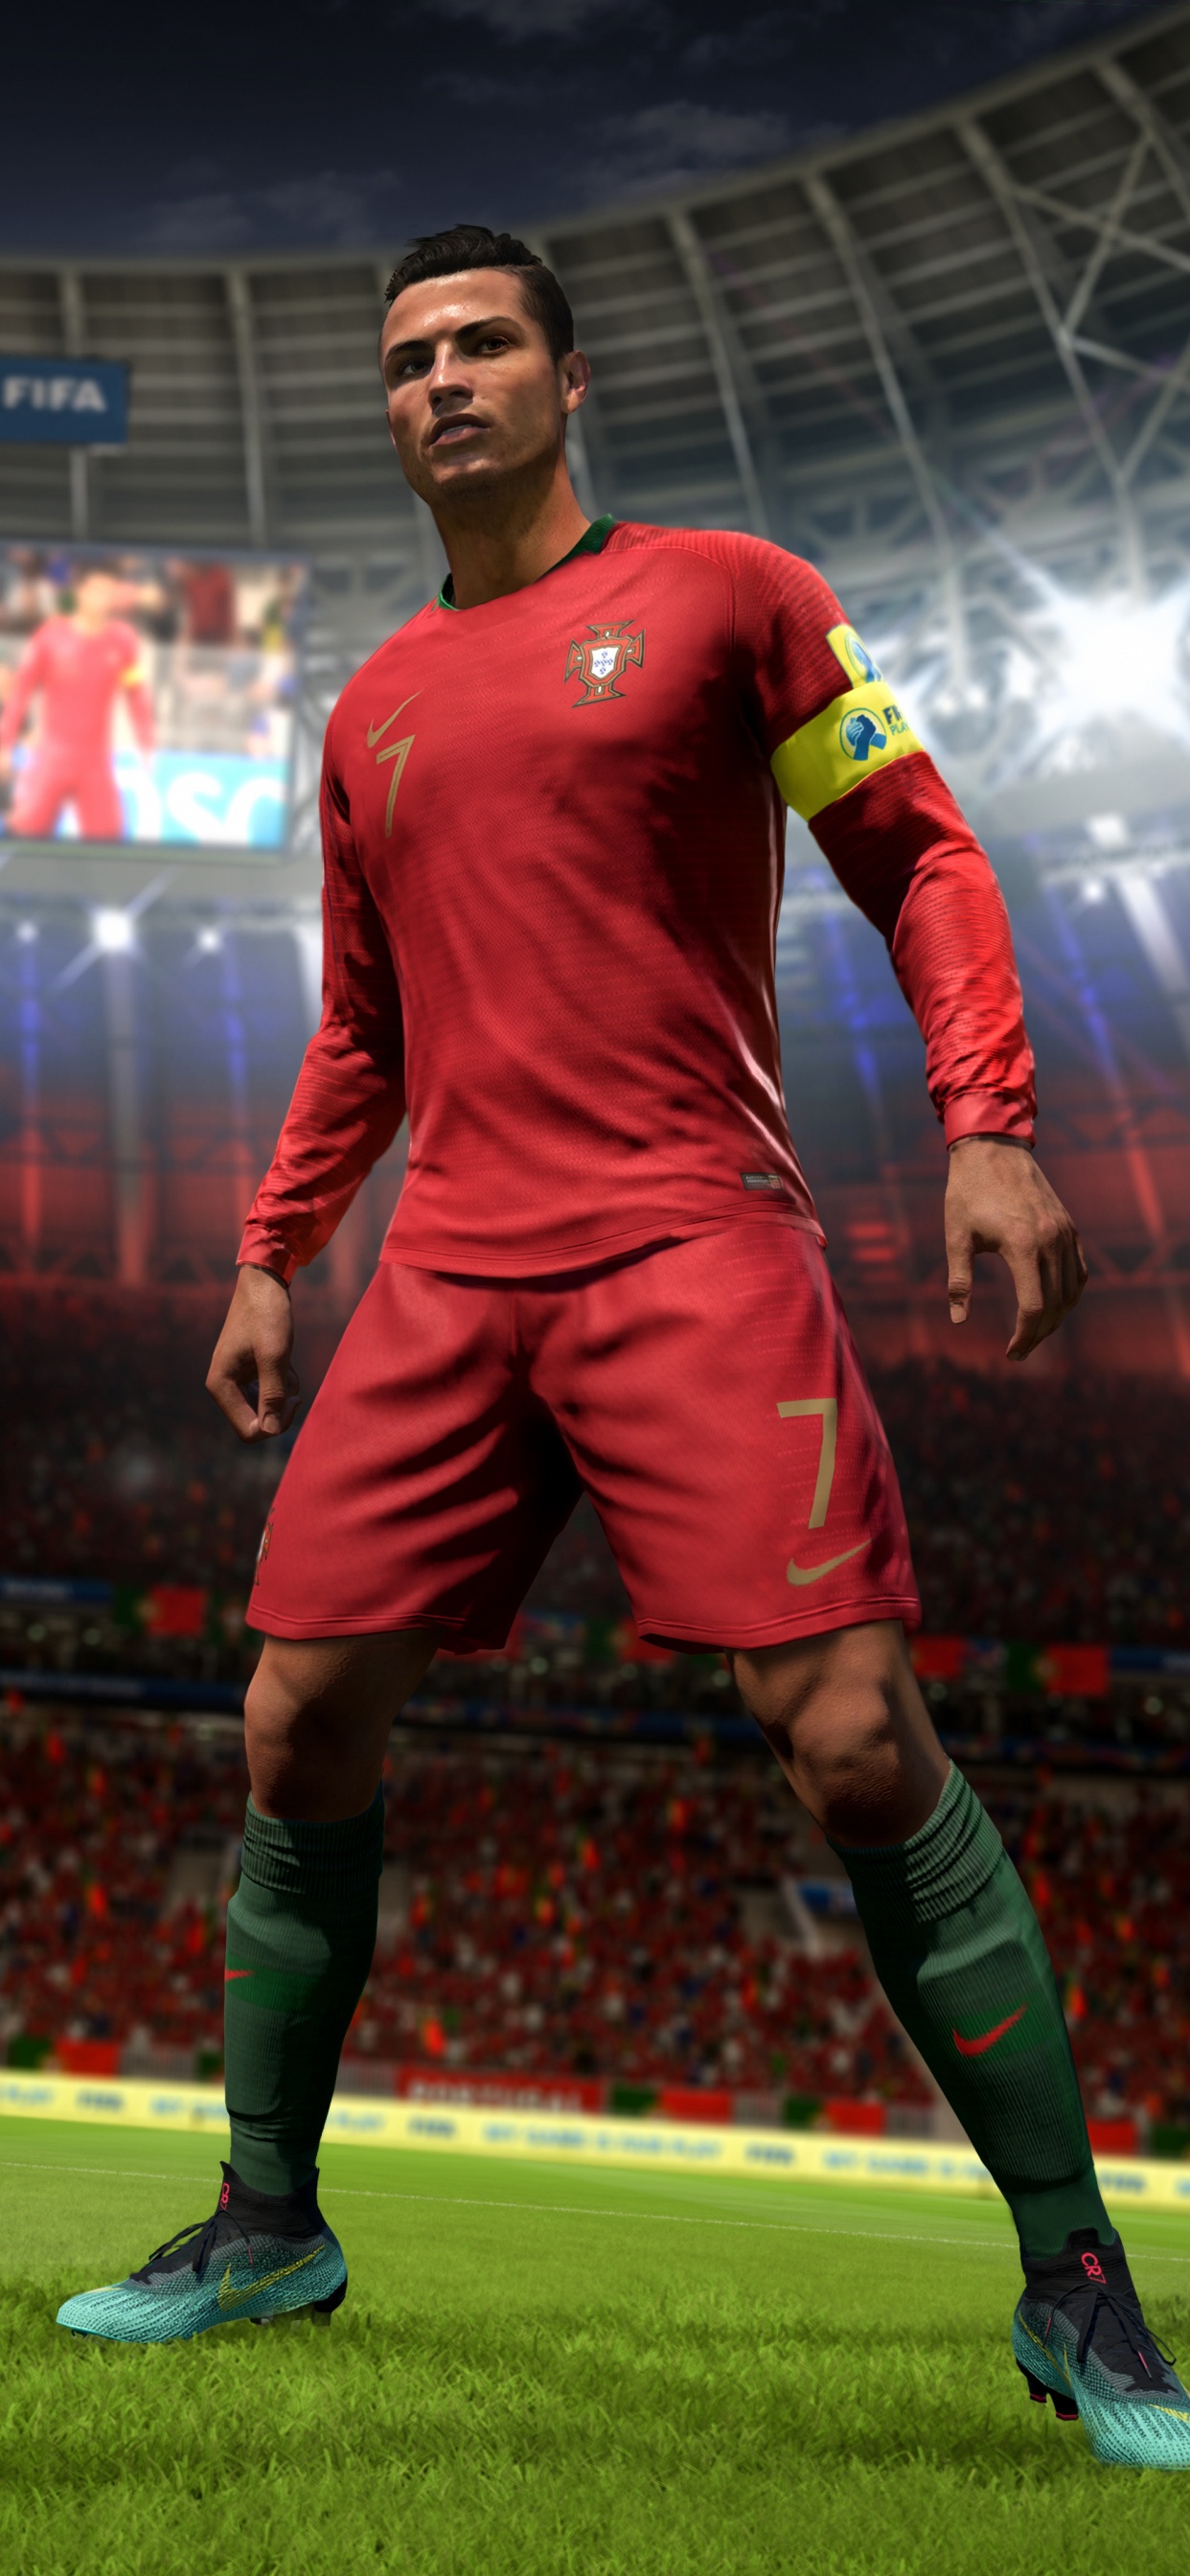 FIFA 18, 2018 World Cup, ea Sports, Electronic Arts, Playstation 4. Wallpaper in 1242x2688 Resolution